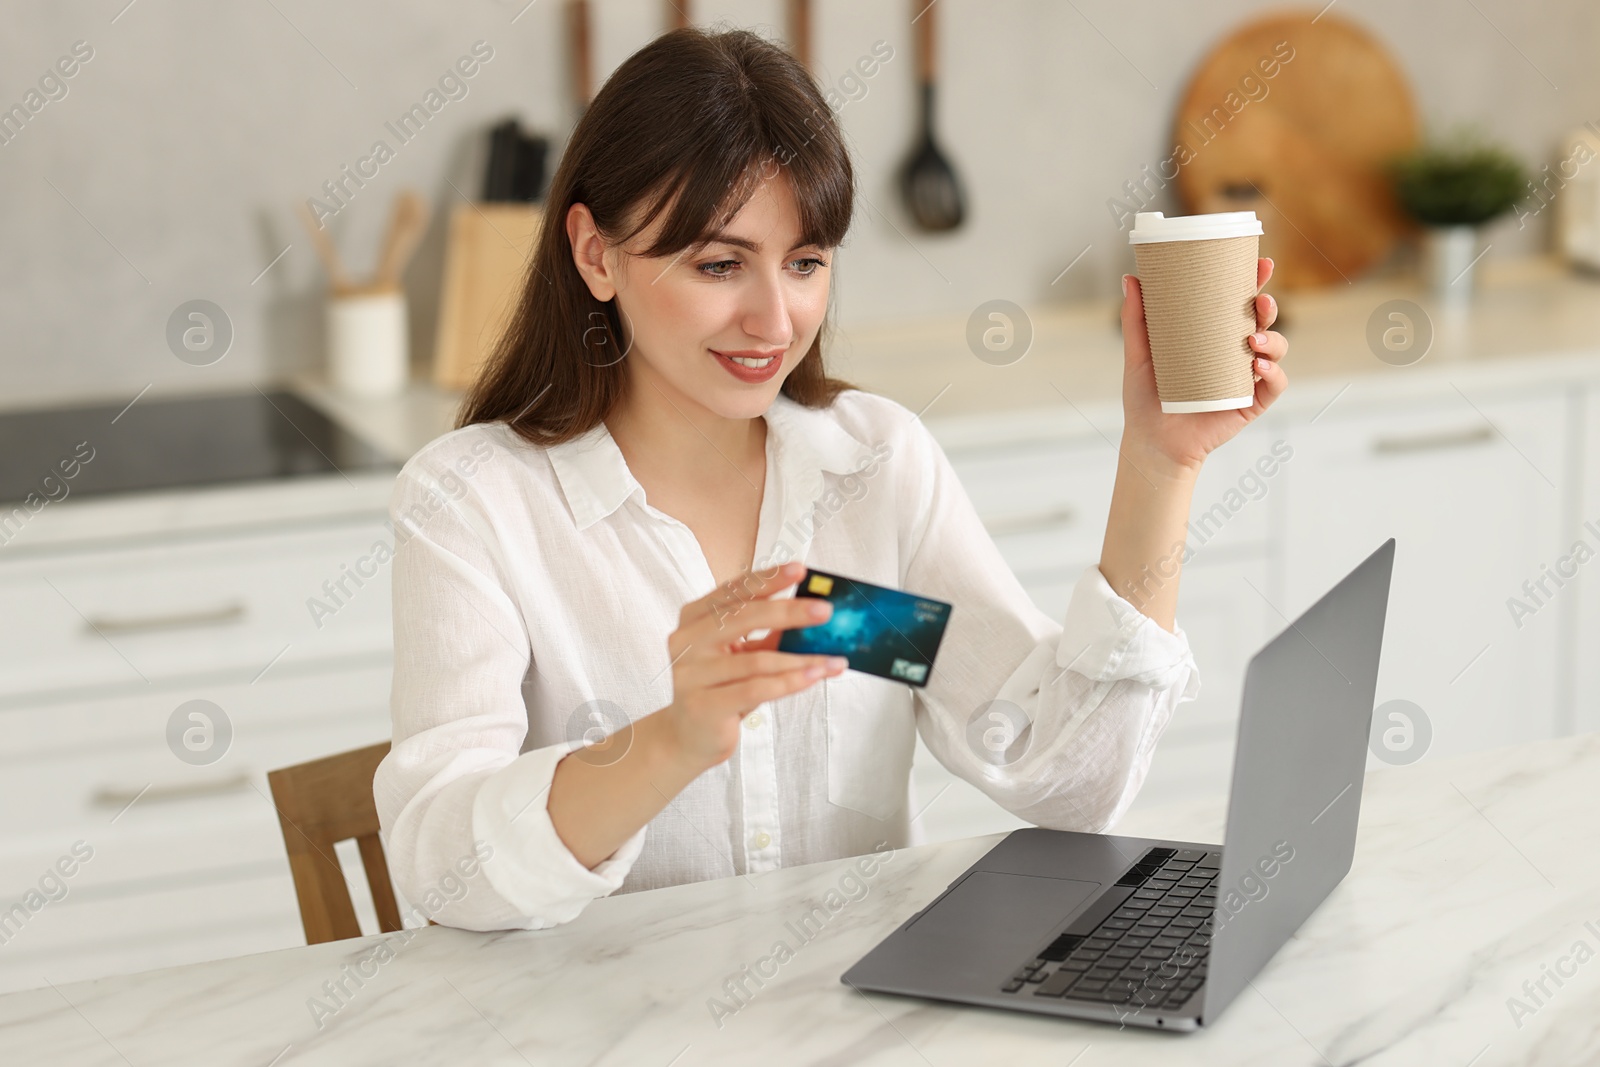 Photo of Online banking. Smiling woman with credit card, paper cup and laptop paying purchase at table indoors